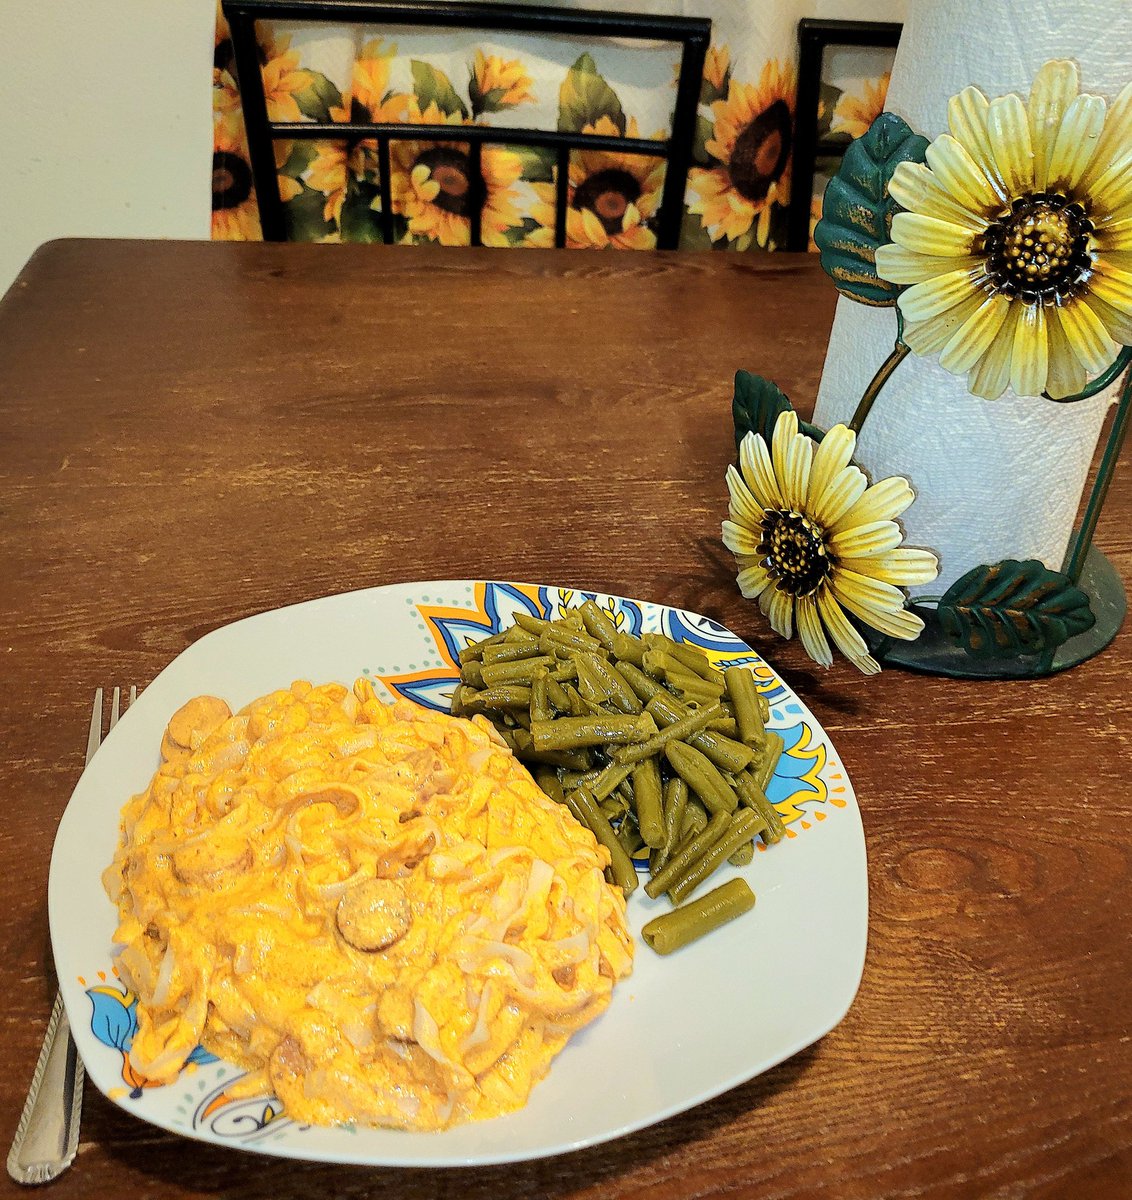 #TwitterSupperClub #Dinner at my house is Mexican Spaghetti (sauce is made of roasted red bell peppers & sour cream) with hot dog slices & buttered green beans. My pasta is #diabetes friendly #Healthy #T1D #KidApproved